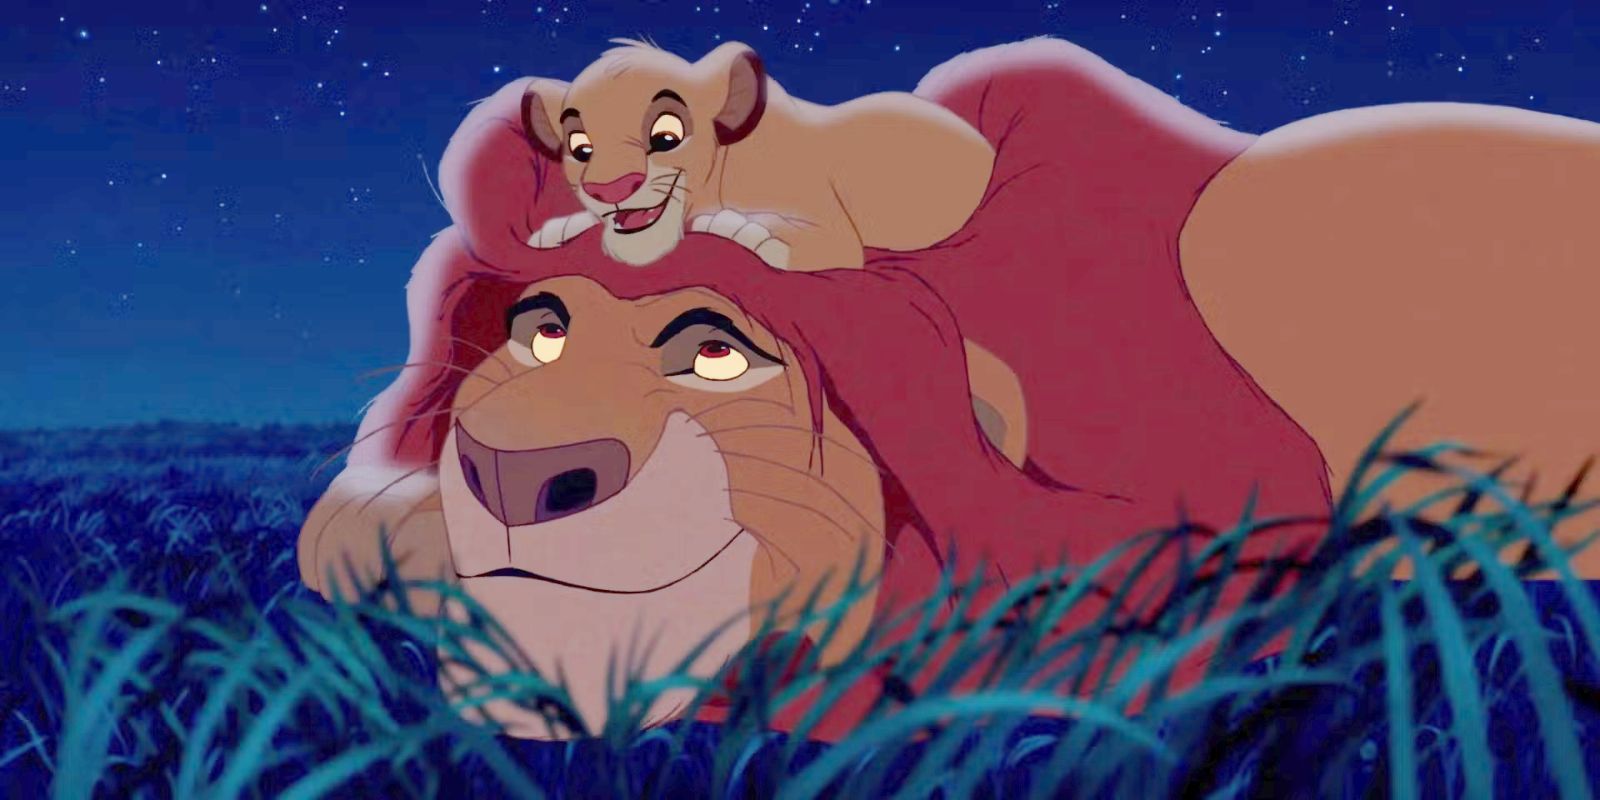 Simba sits on Mufasa's head in The Lion King